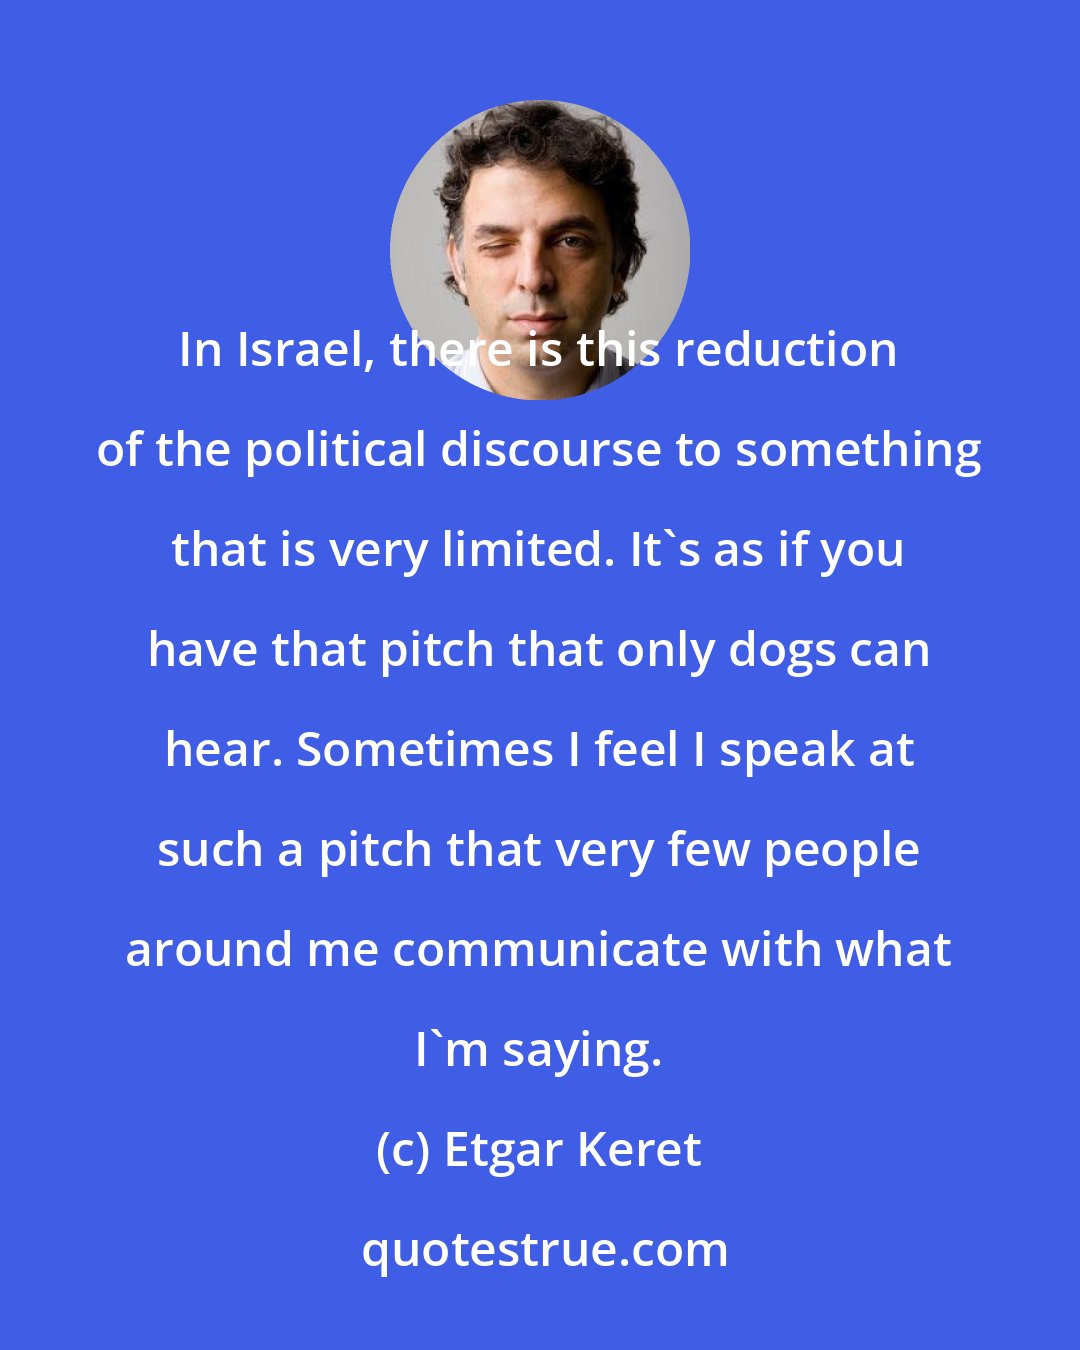 Etgar Keret: In Israel, there is this reduction of the political discourse to something that is very limited. It's as if you have that pitch that only dogs can hear. Sometimes I feel I speak at such a pitch that very few people around me communicate with what I'm saying.